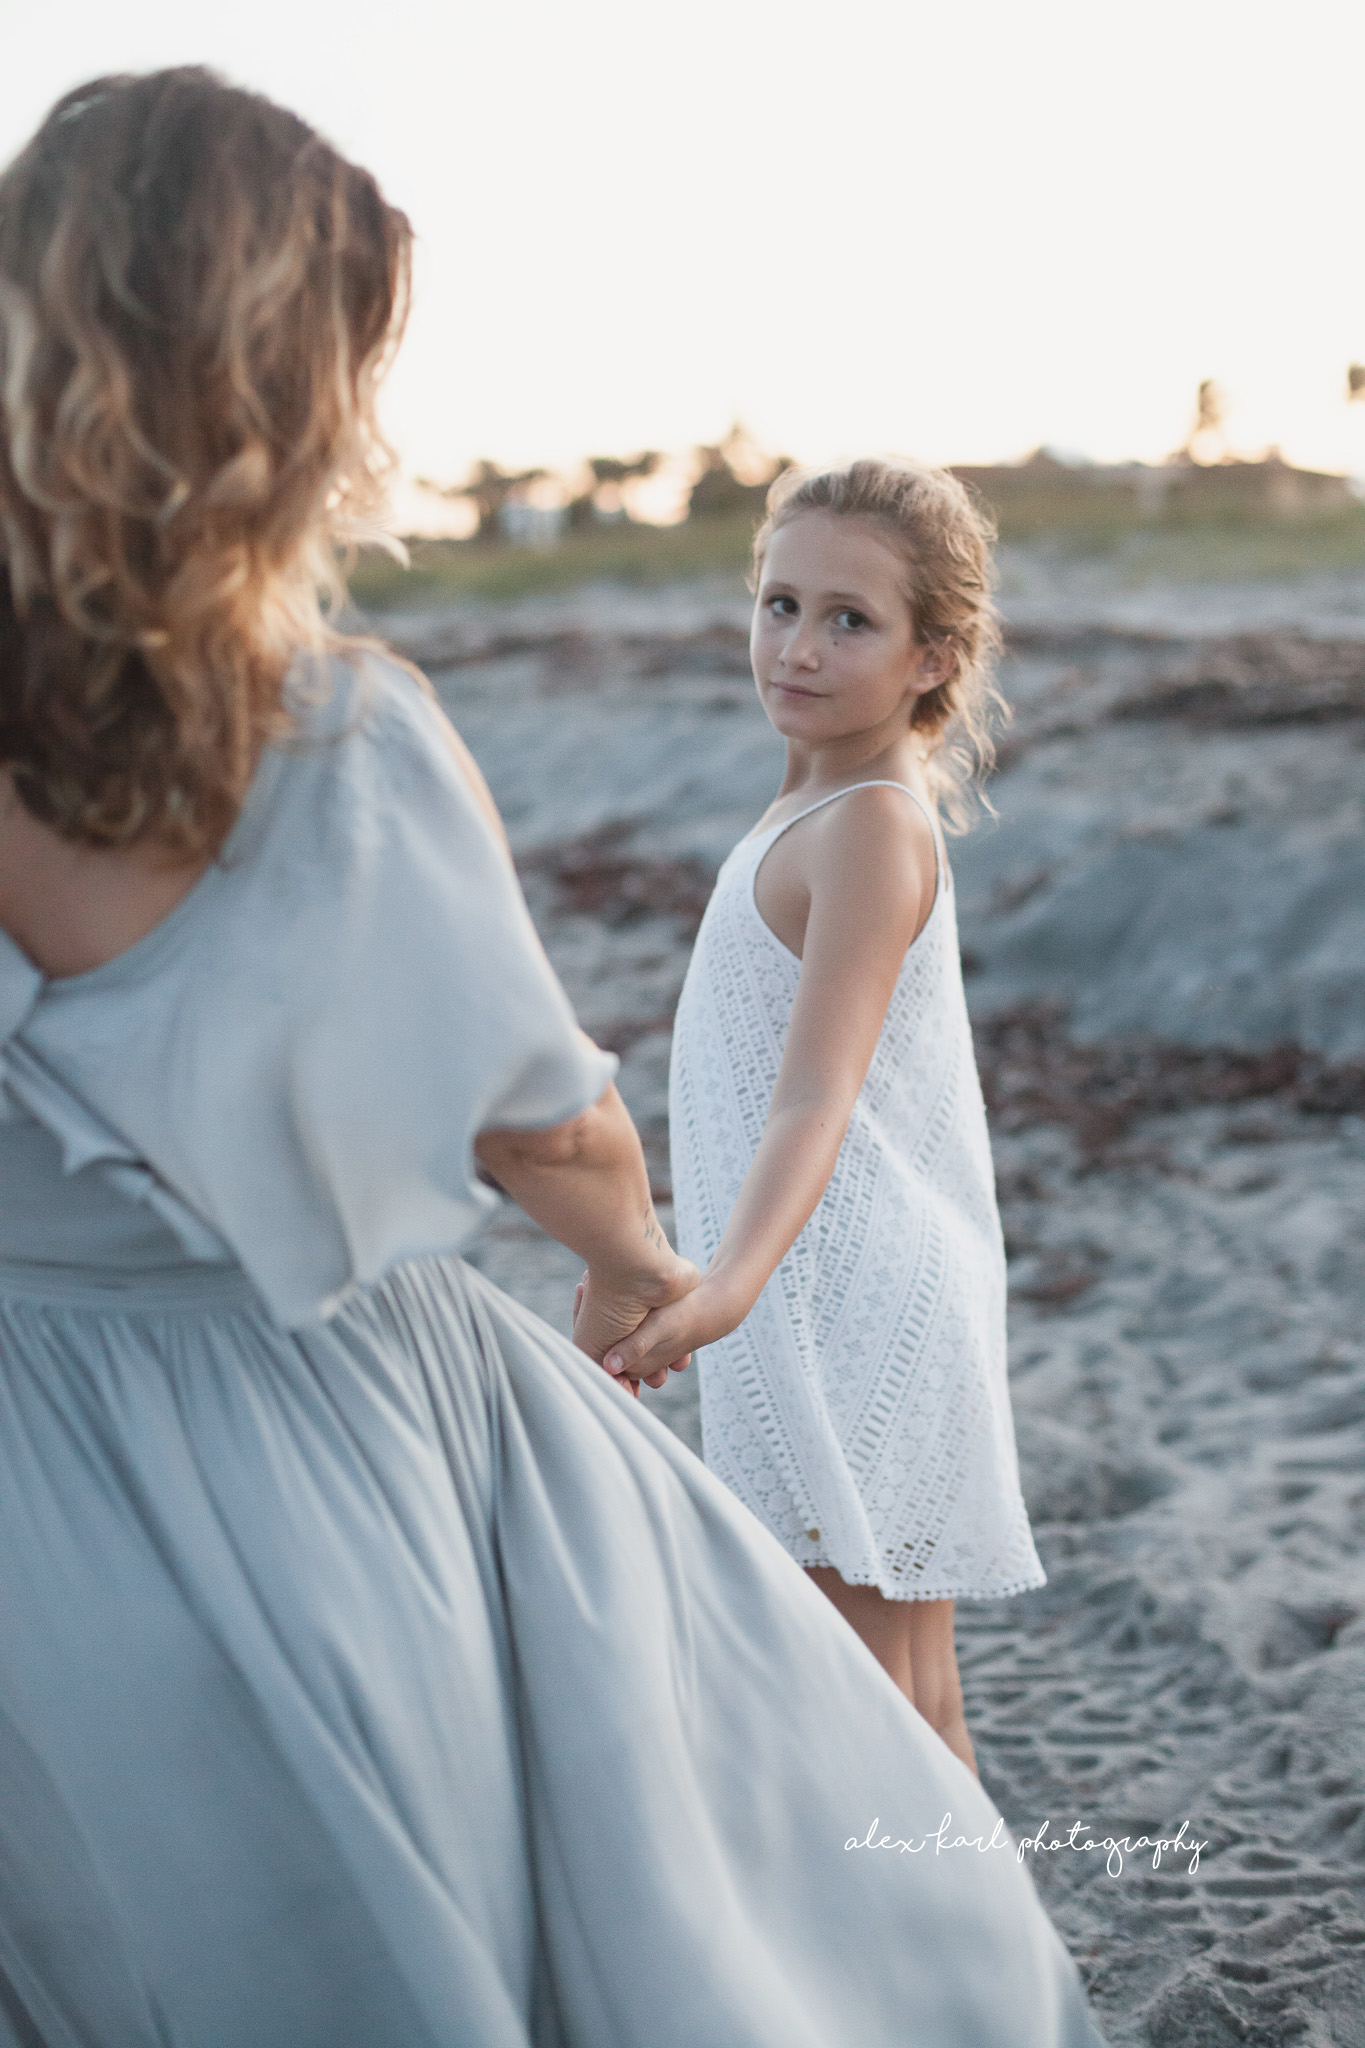 A girl looks over her shoulder  | Alex Karl Photography | Palm Beach Family Photographer